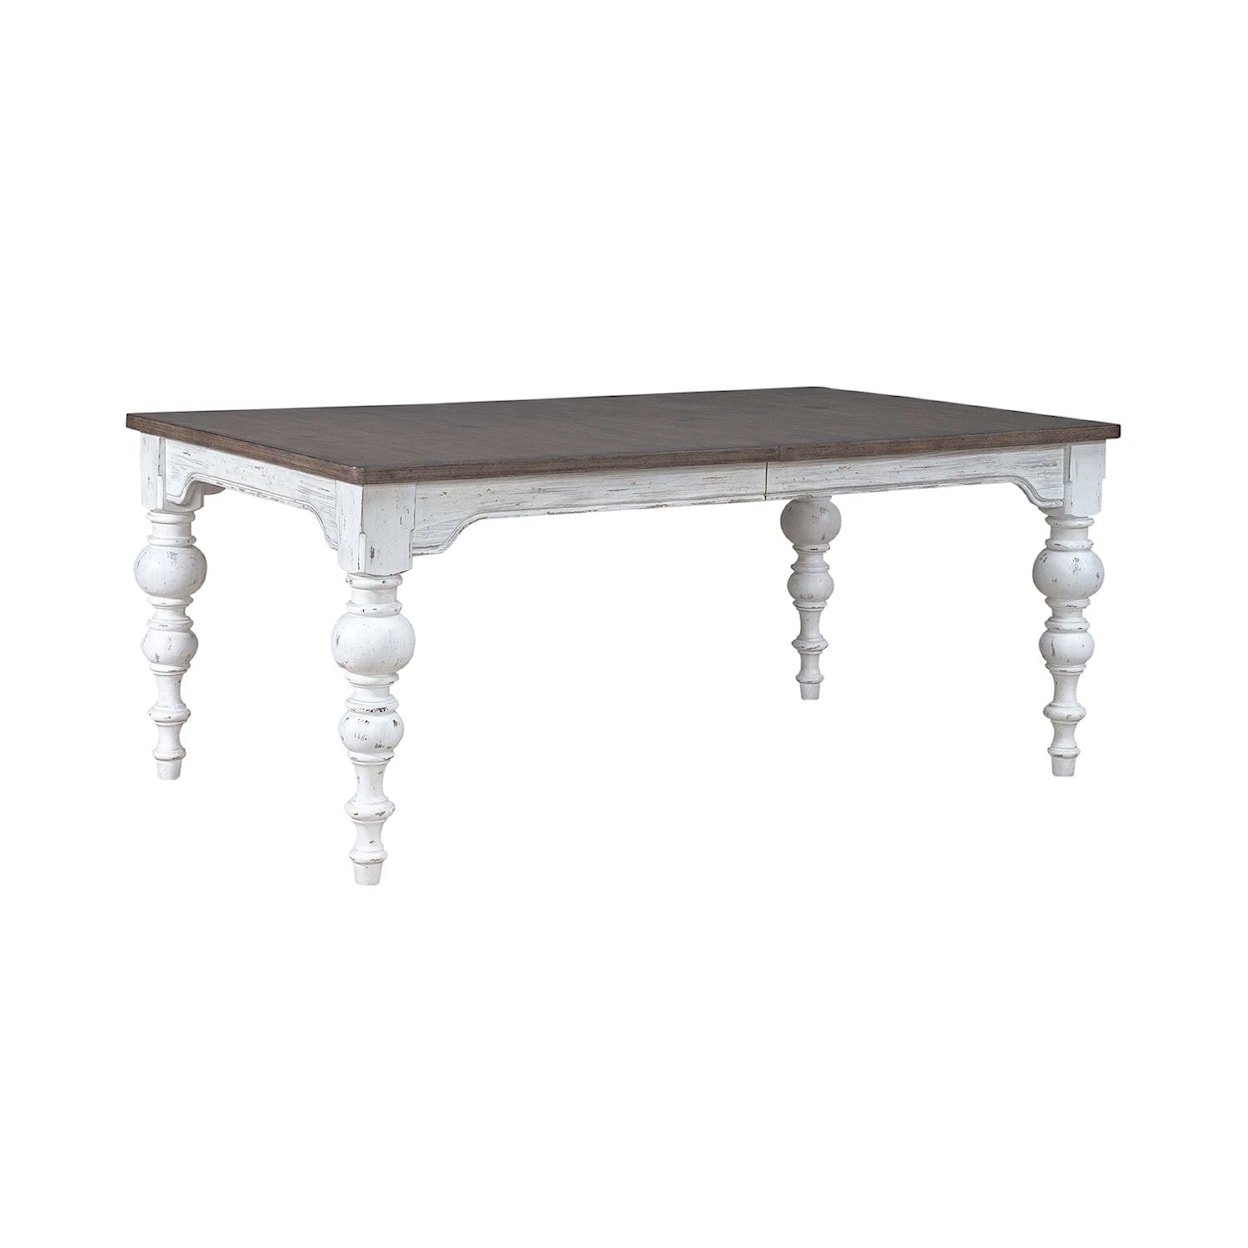 Libby River Place Rectangular Dining Table